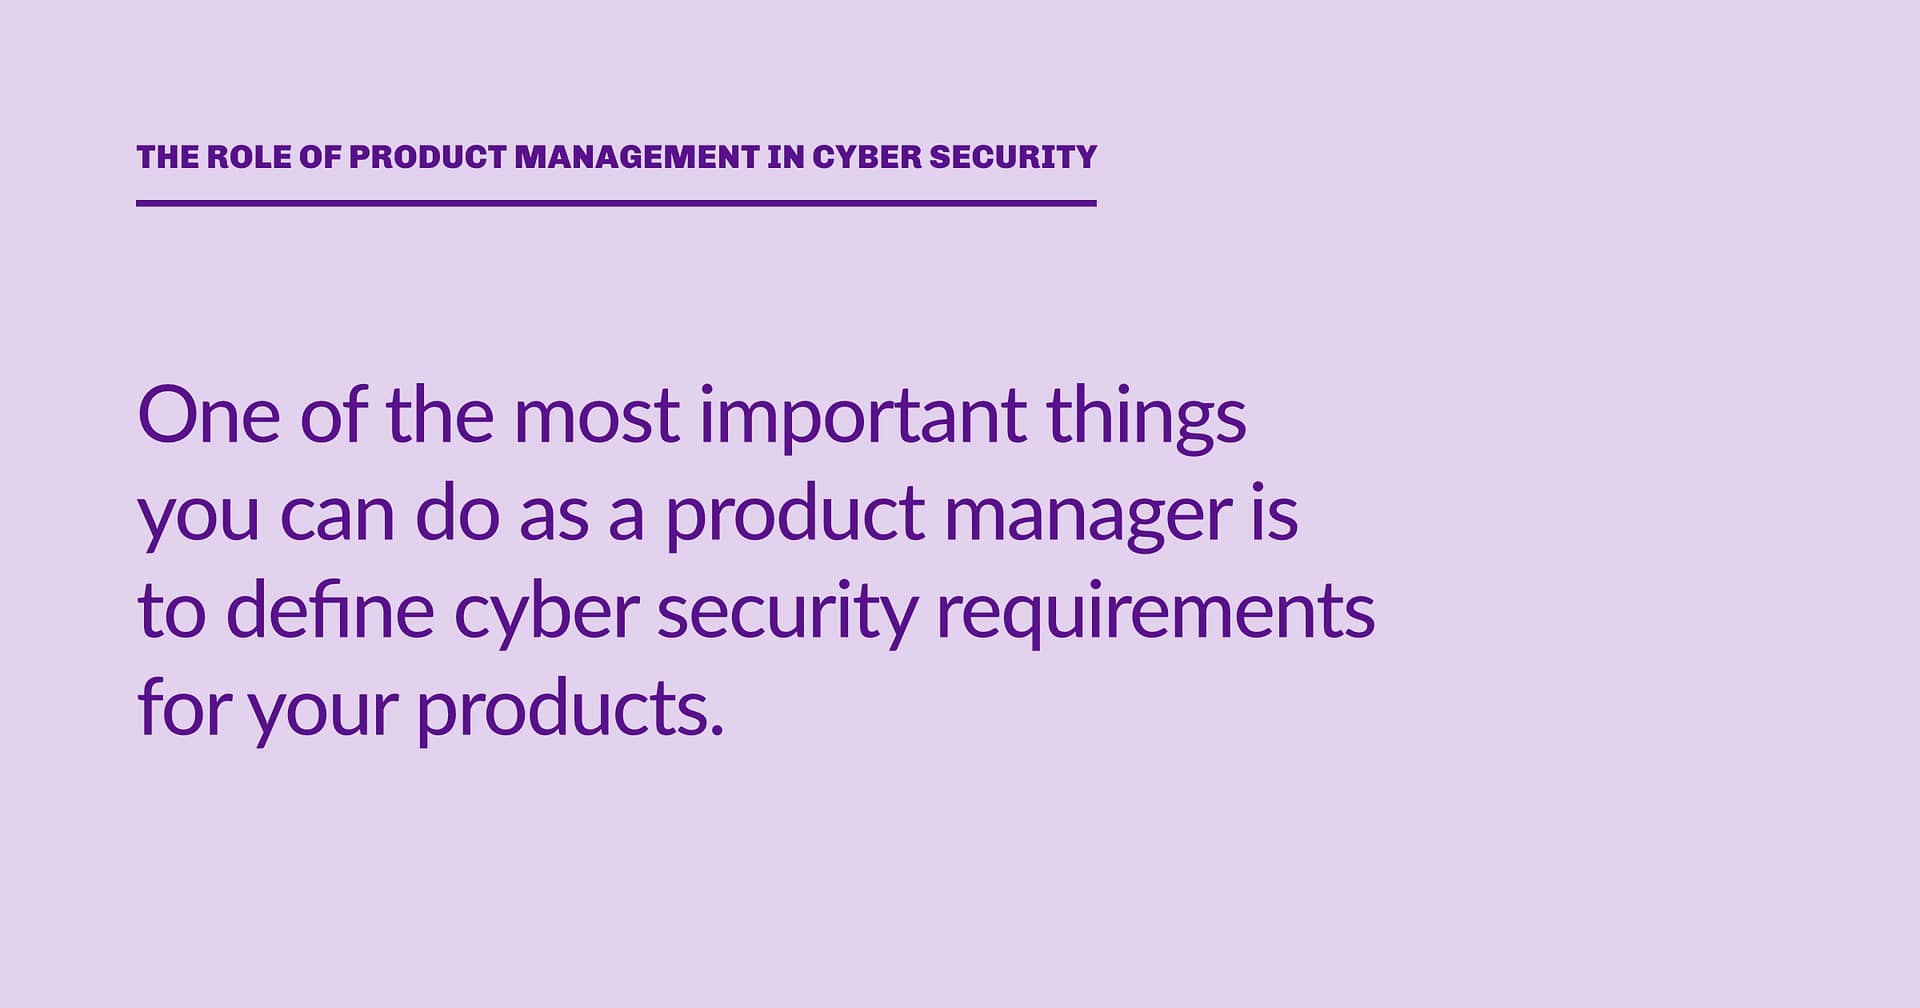 Highlight block: One of the most important things you can do as a product manager is to define cyber security requirements for your products.